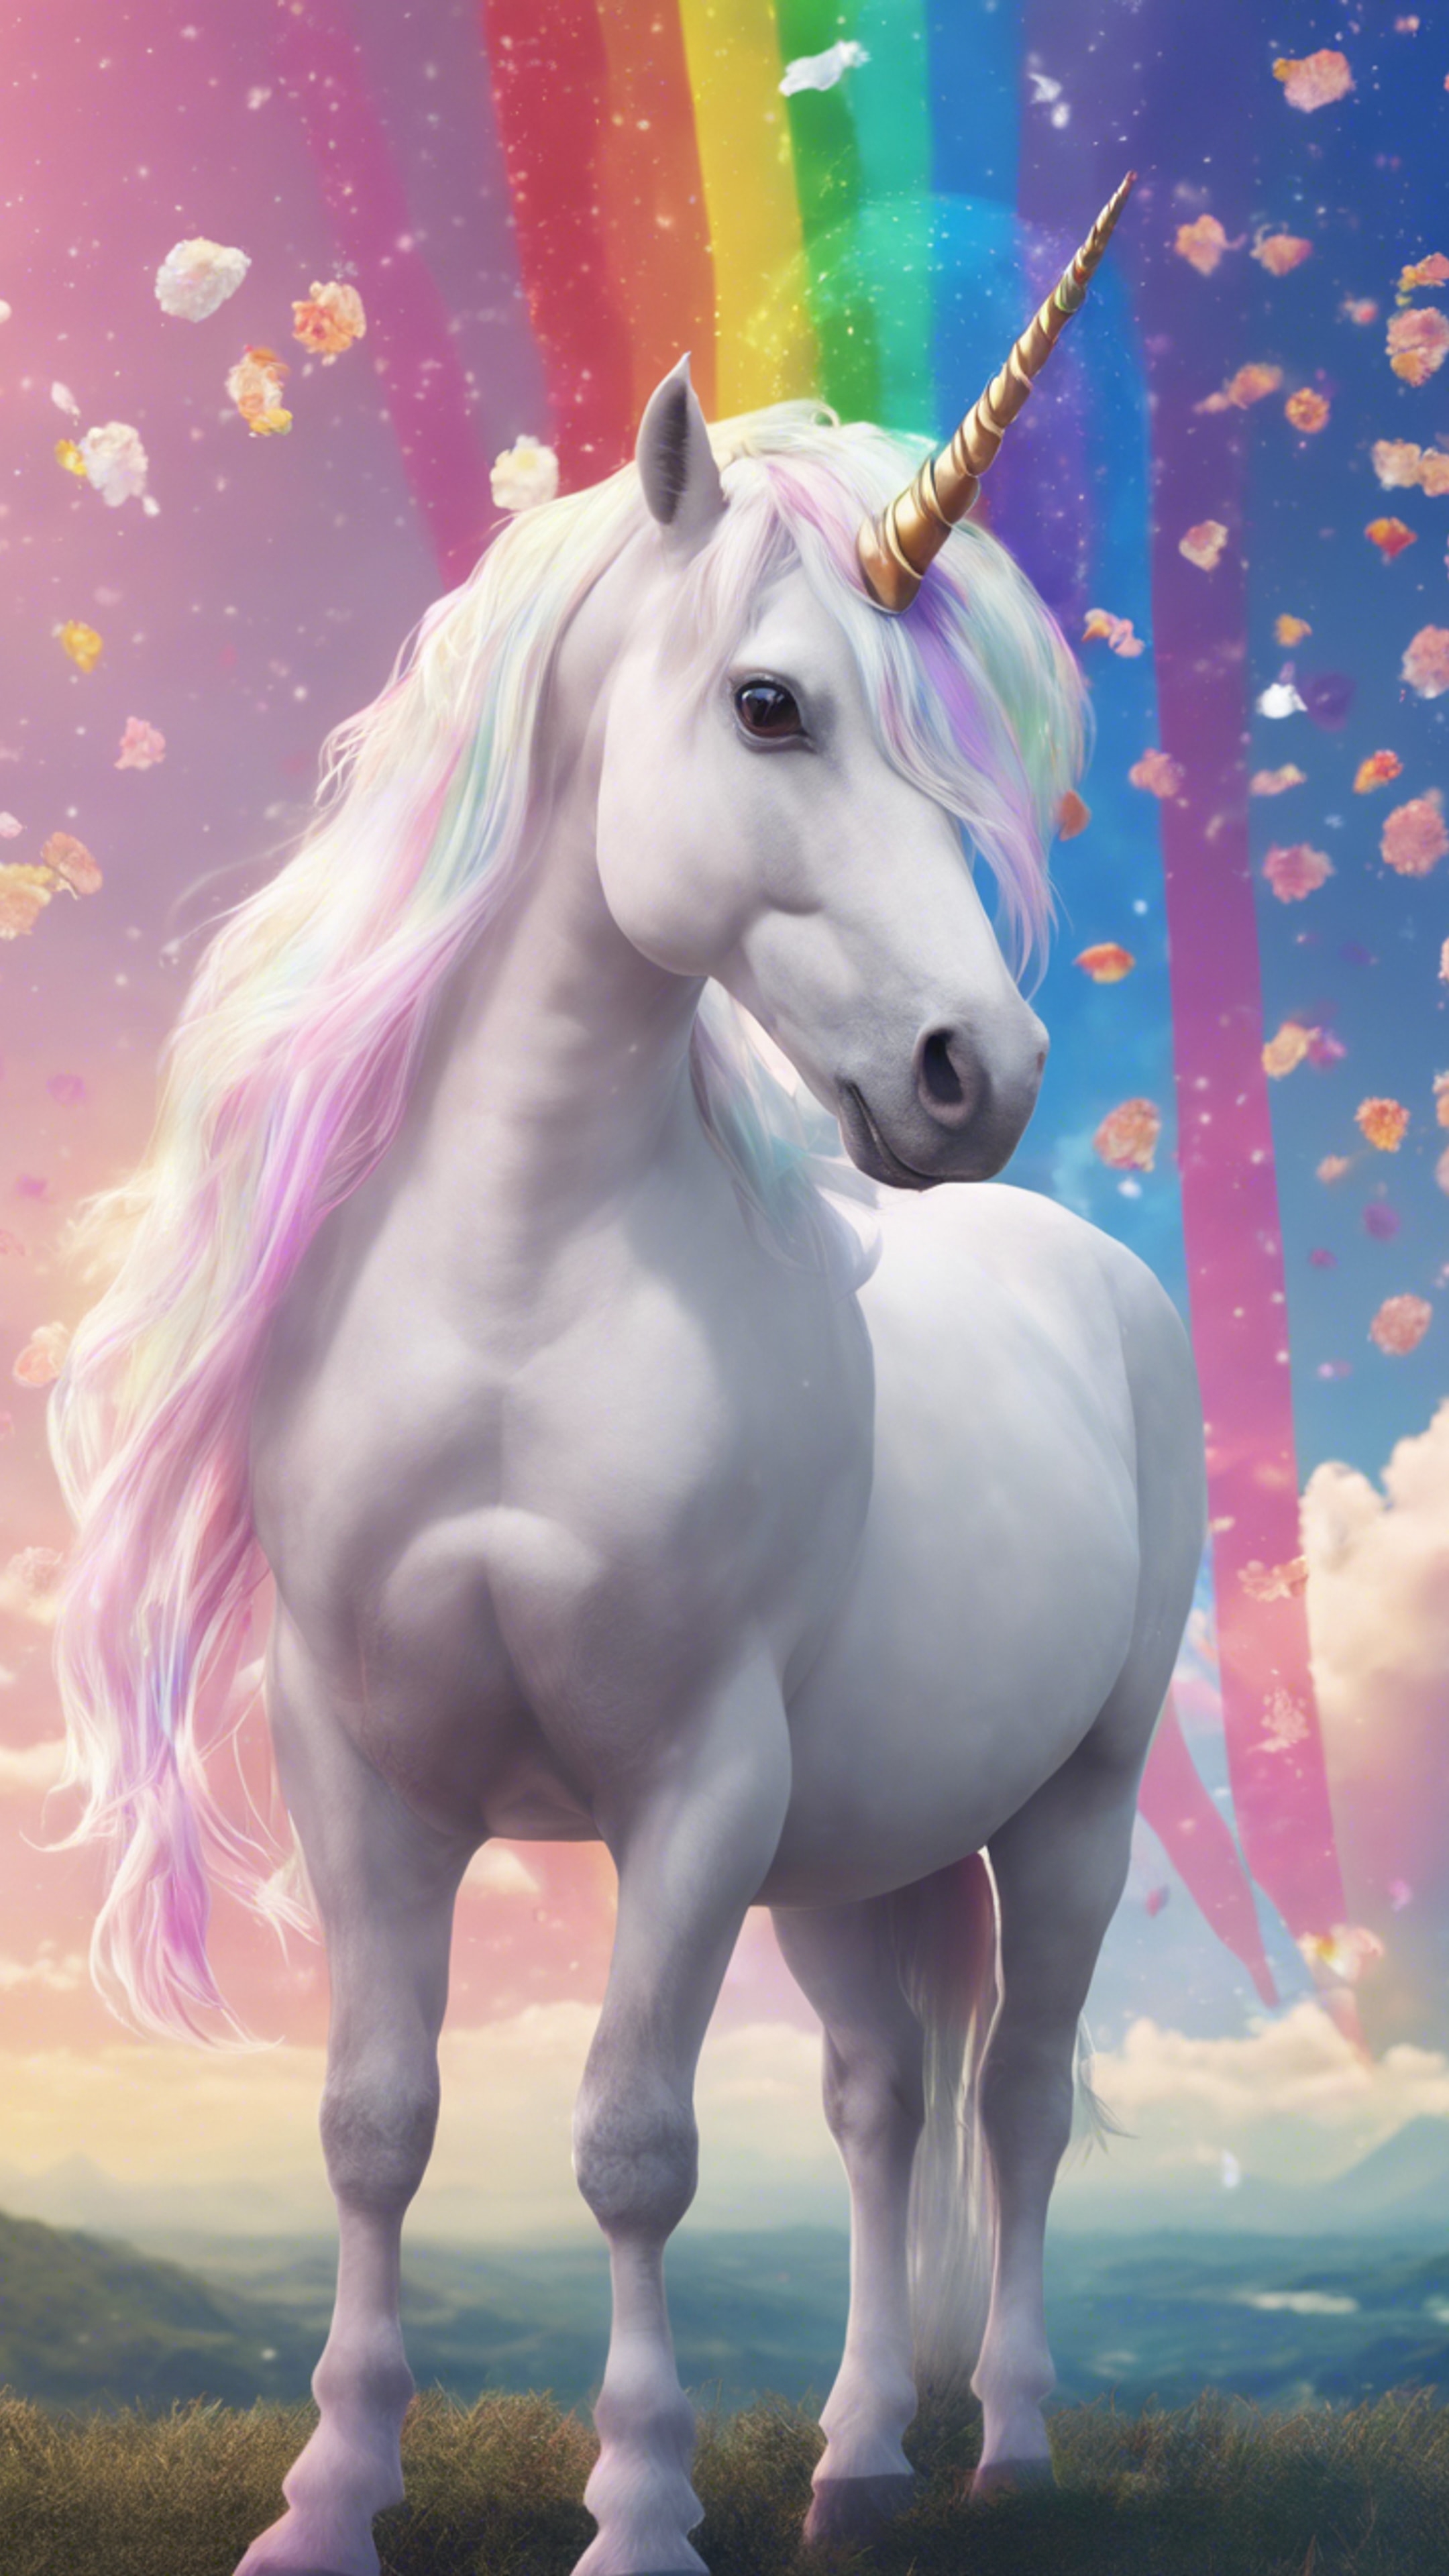 A white unicorn with rainbow-colored mane in a kawaii styled anime background. Tapeta[3fcd035c52a54abd9a77]